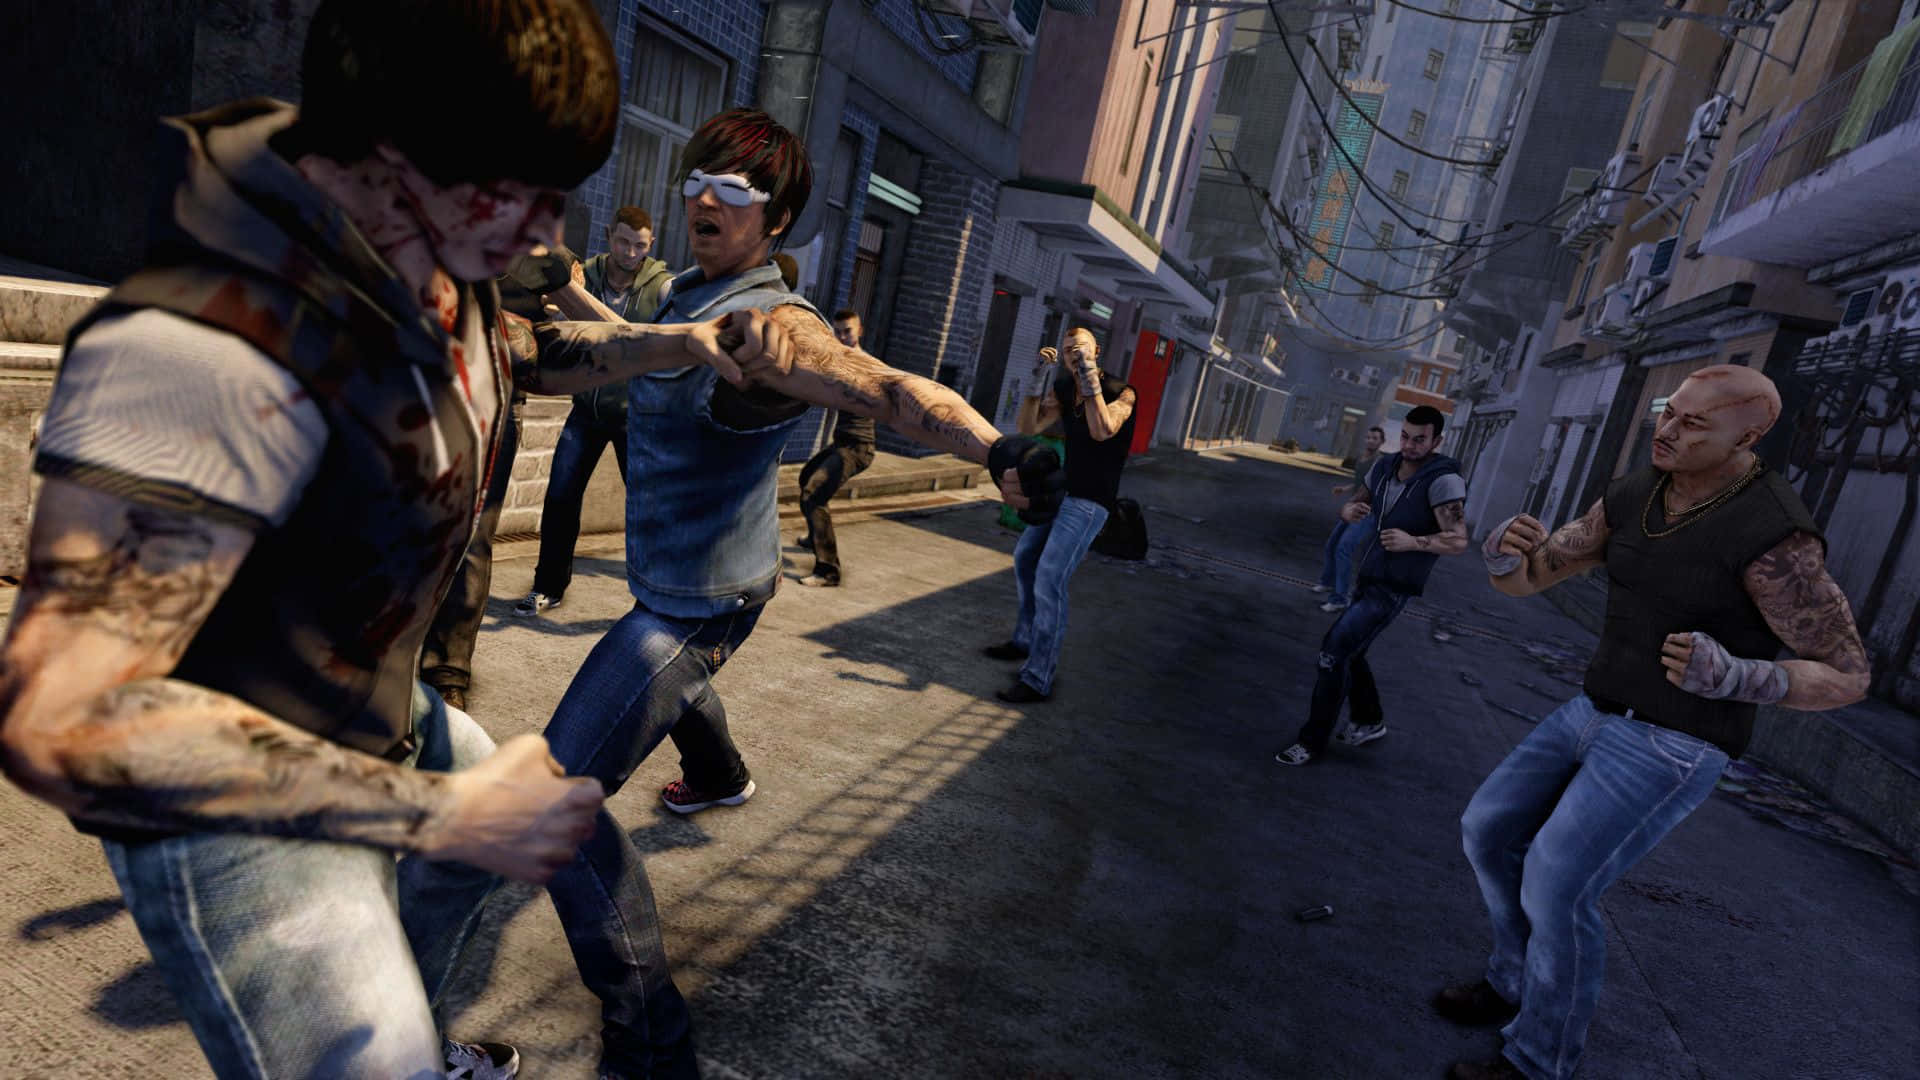 Discover a world of intrigue and adventure in Sleeping Dogs